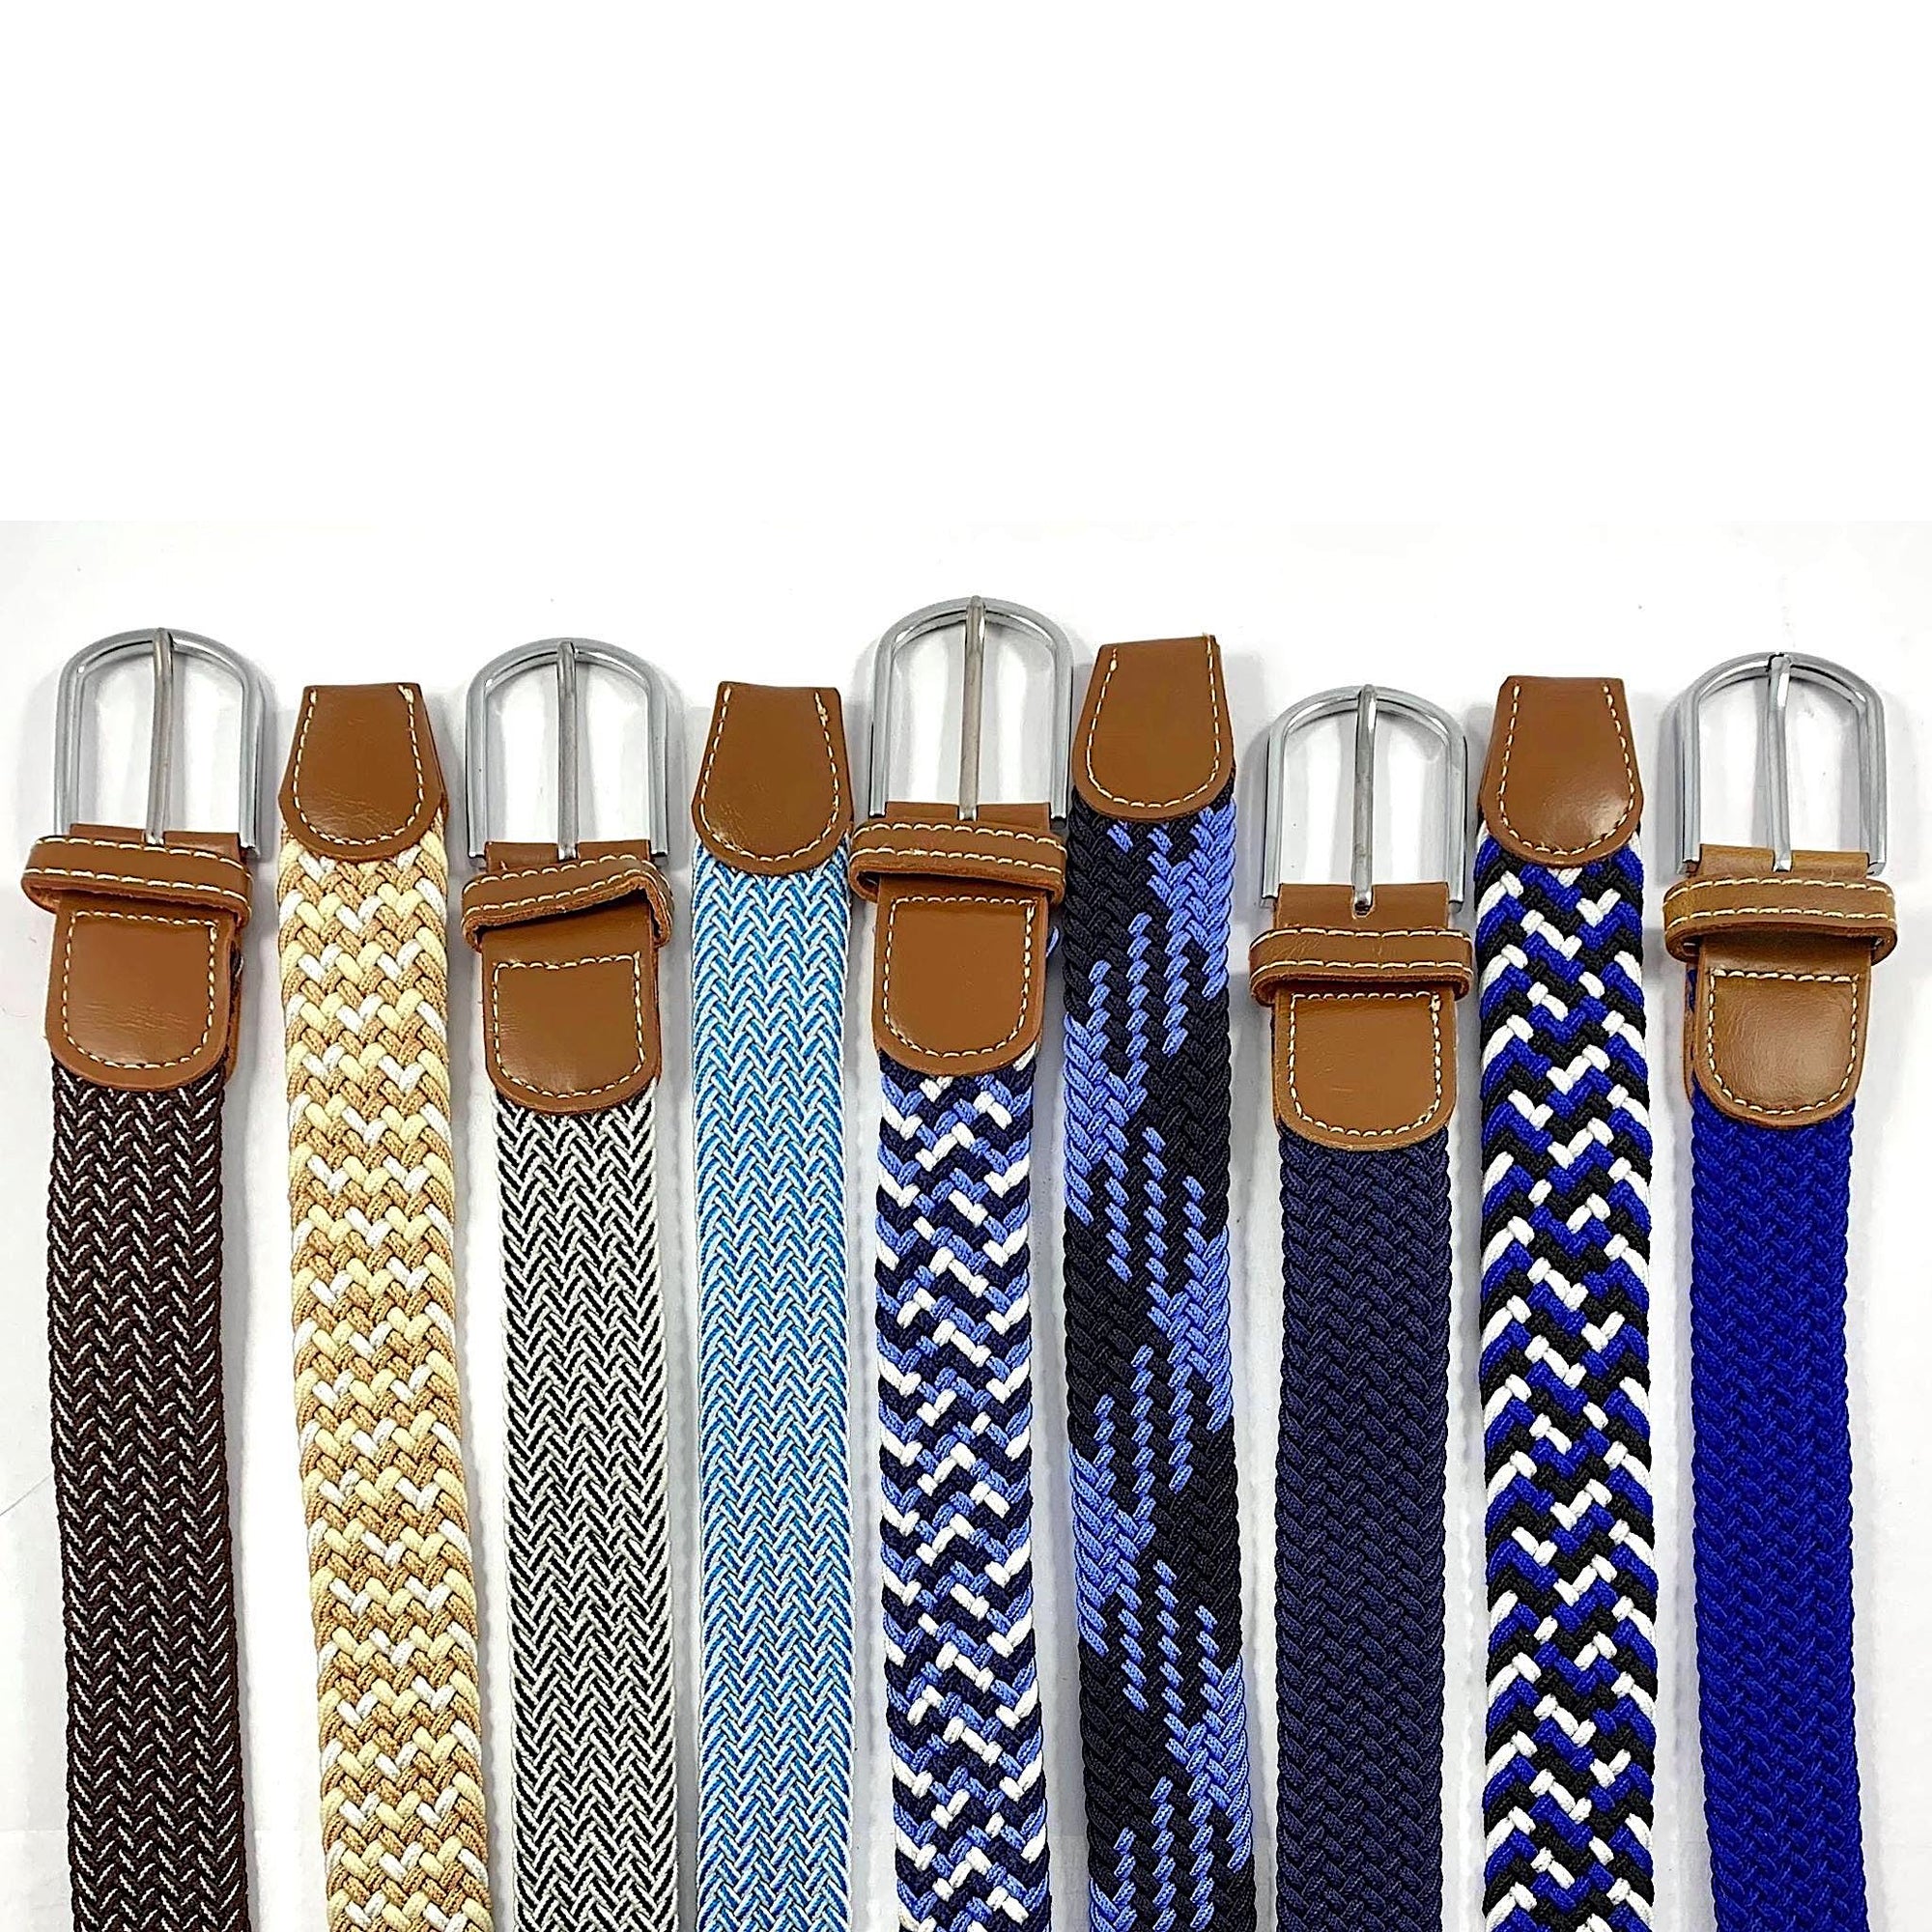 Varying coloured elastic belts, all with silver buckles and brown leather ends.